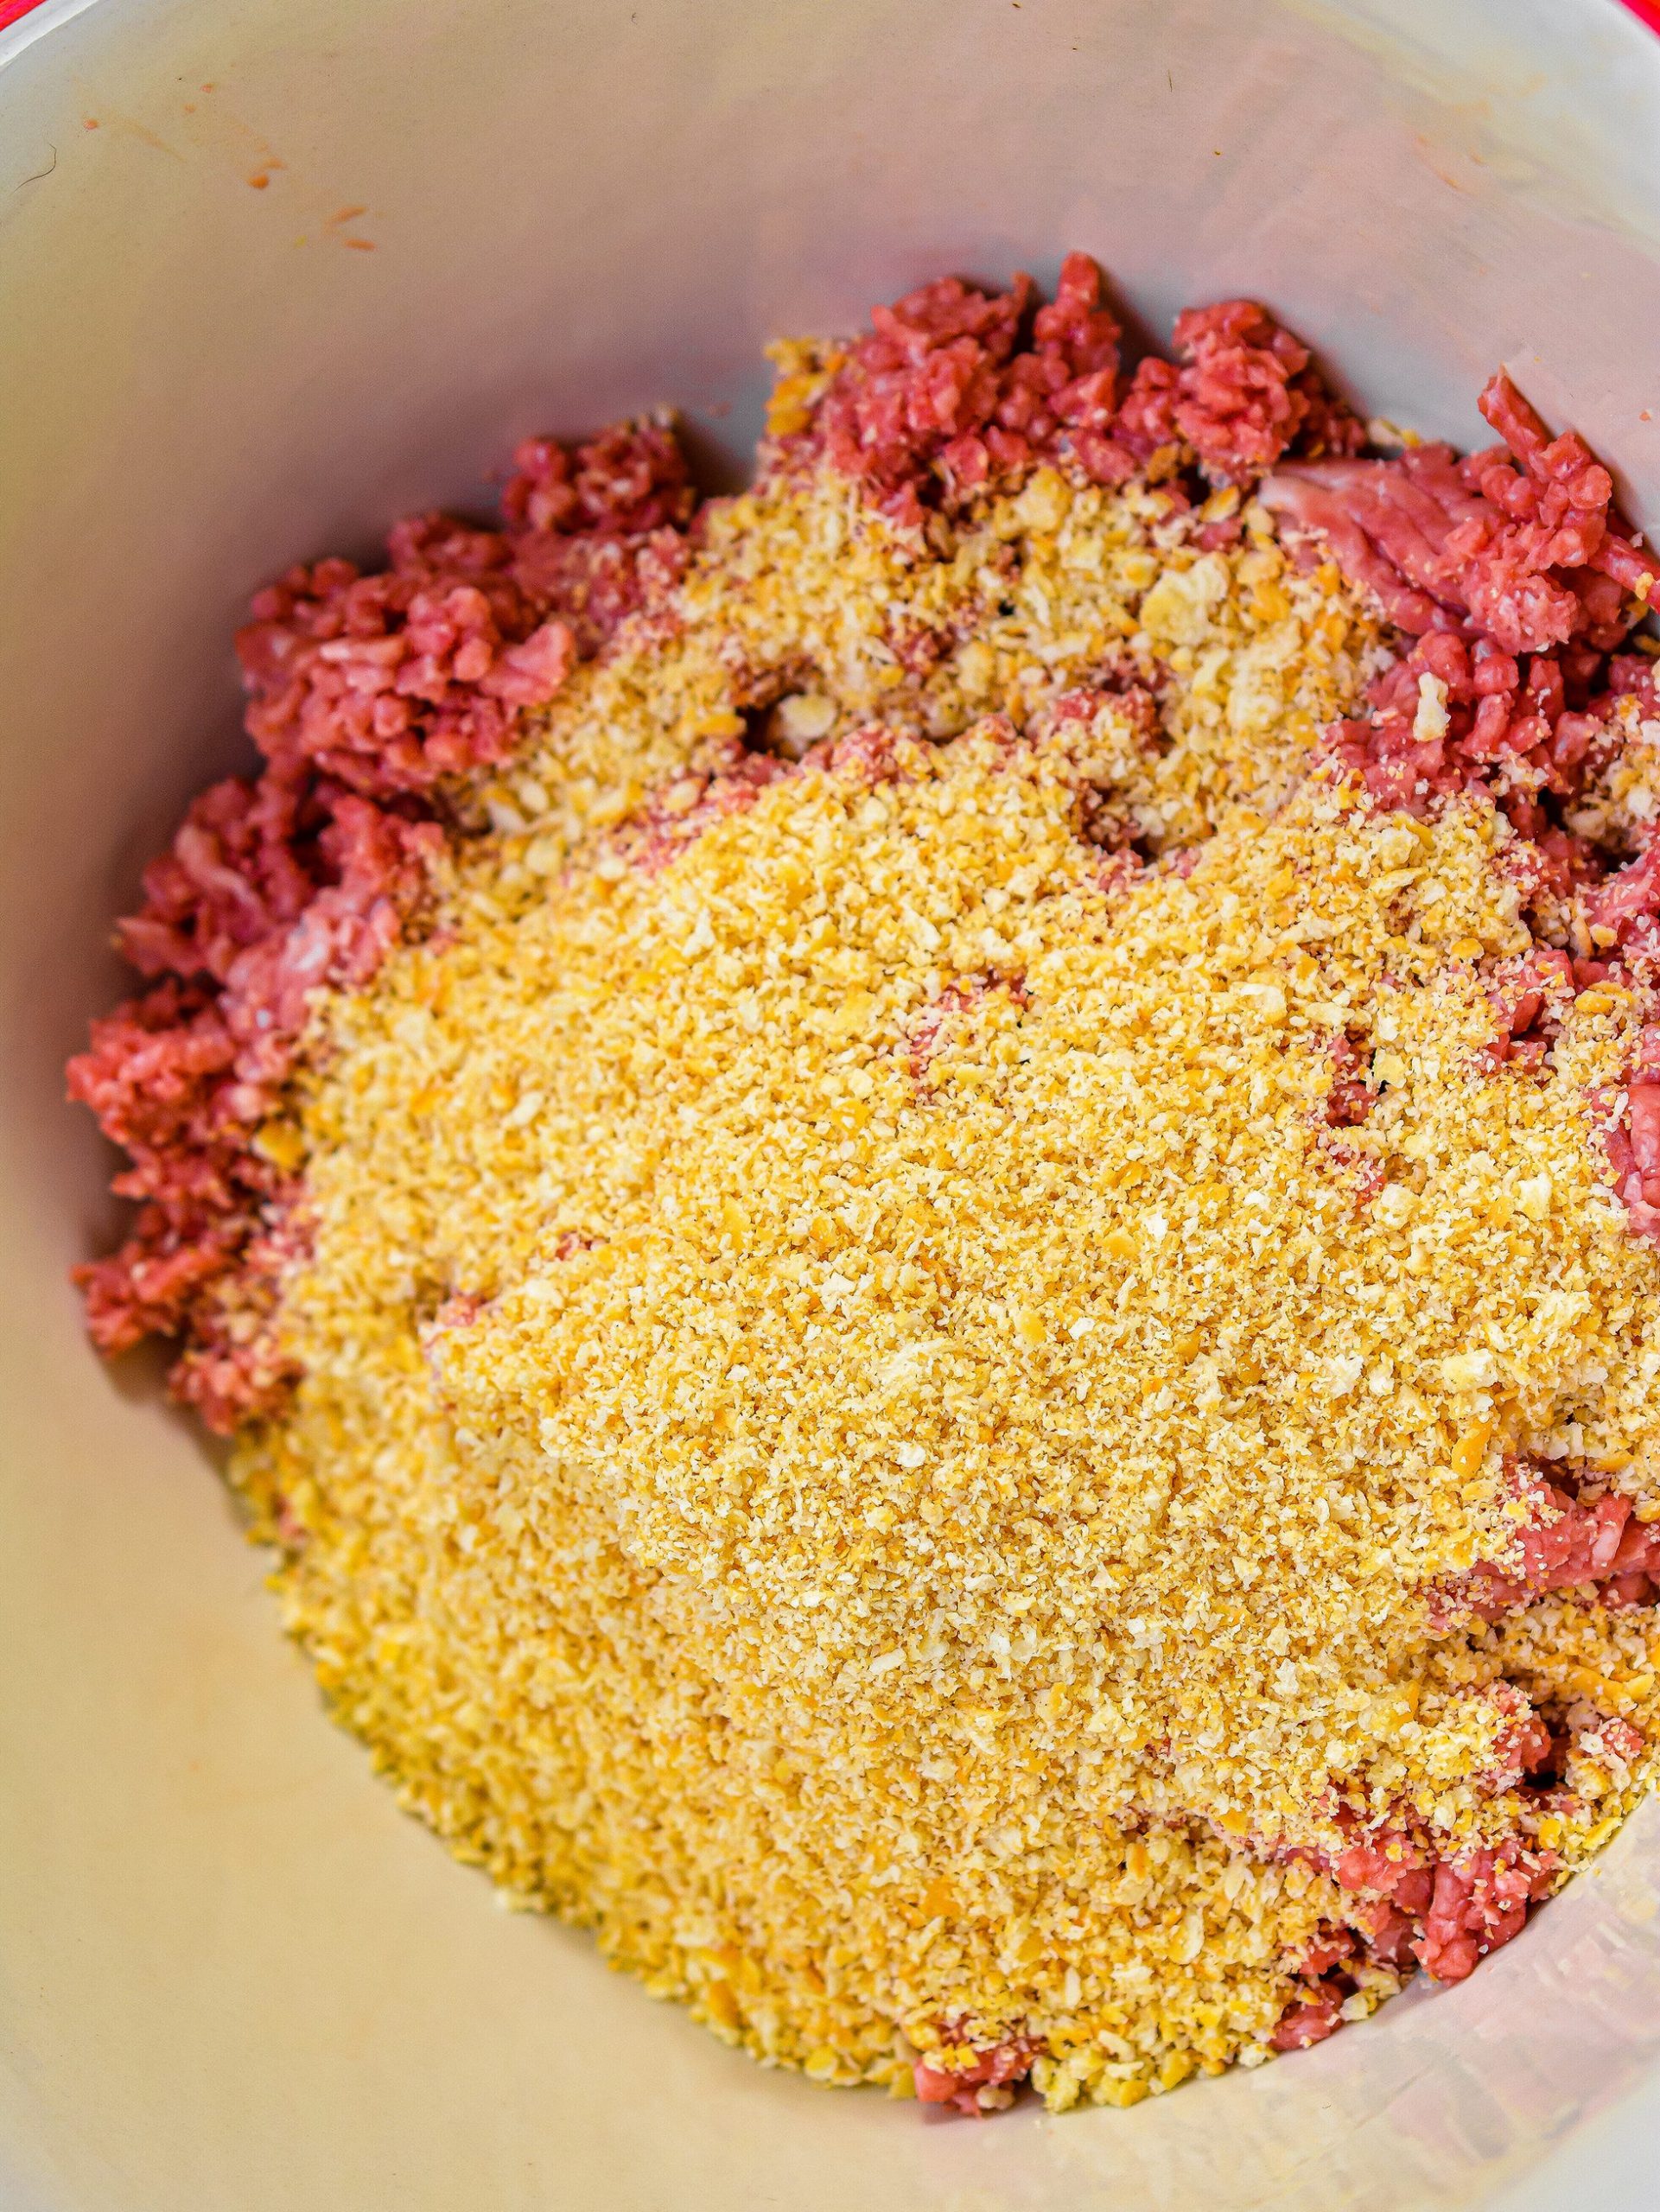 In a mixing bowl, combine 2 lbs ground beef and 25 ritz cracker crumbs.